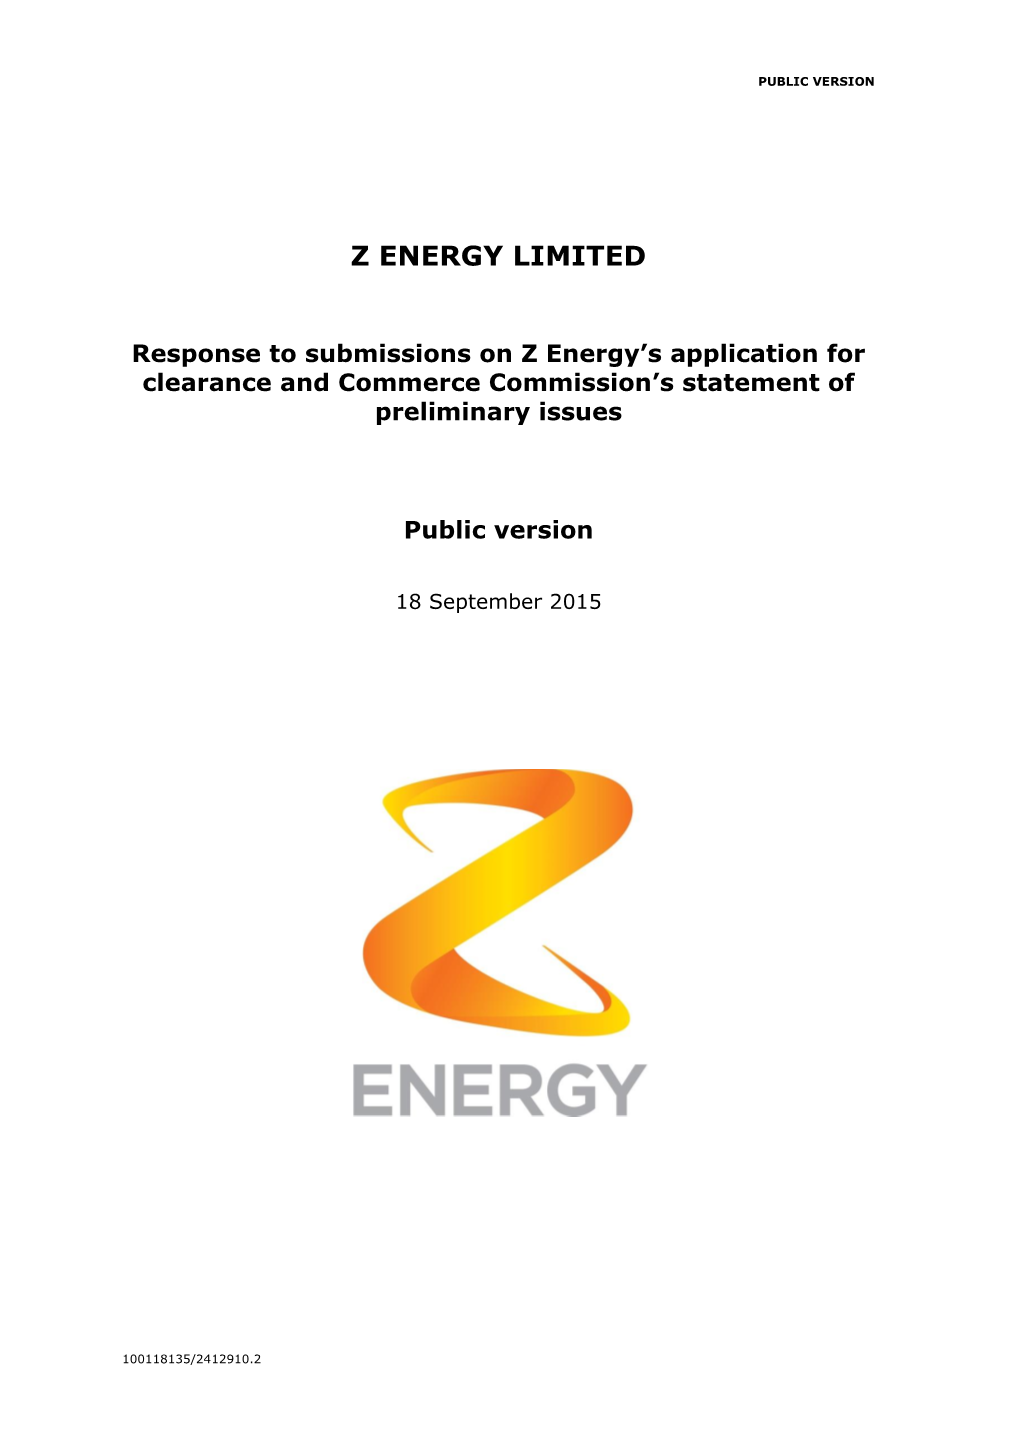 Z Energy Response to Submissions